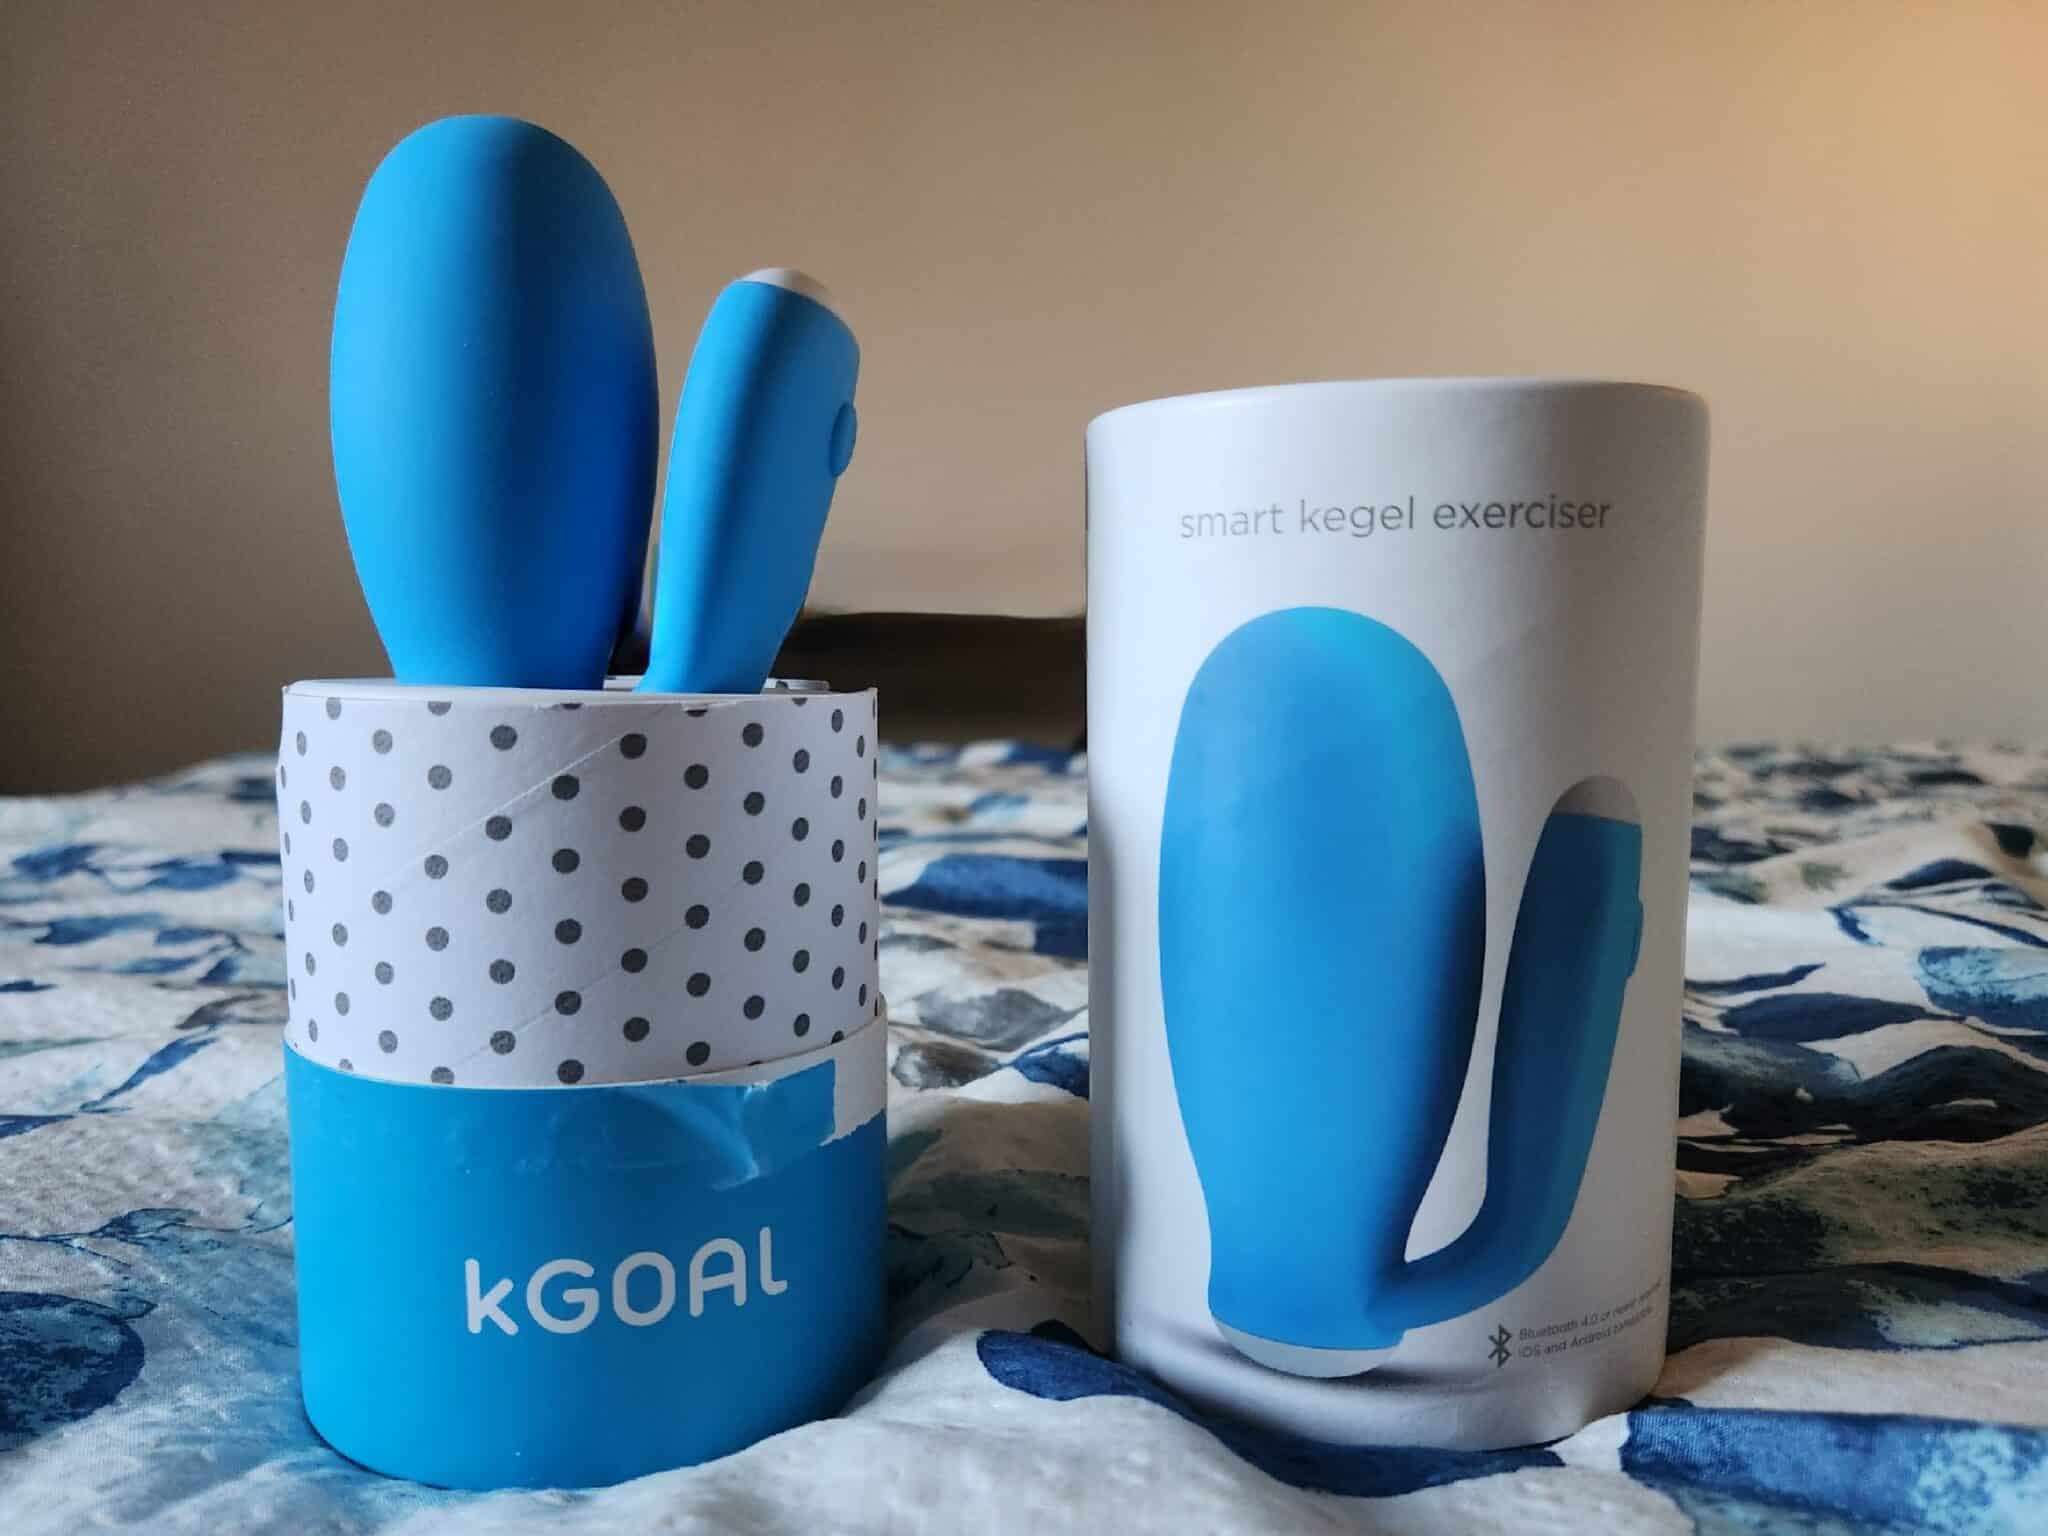 kGoal Classic The Unboxing Experience: A Review